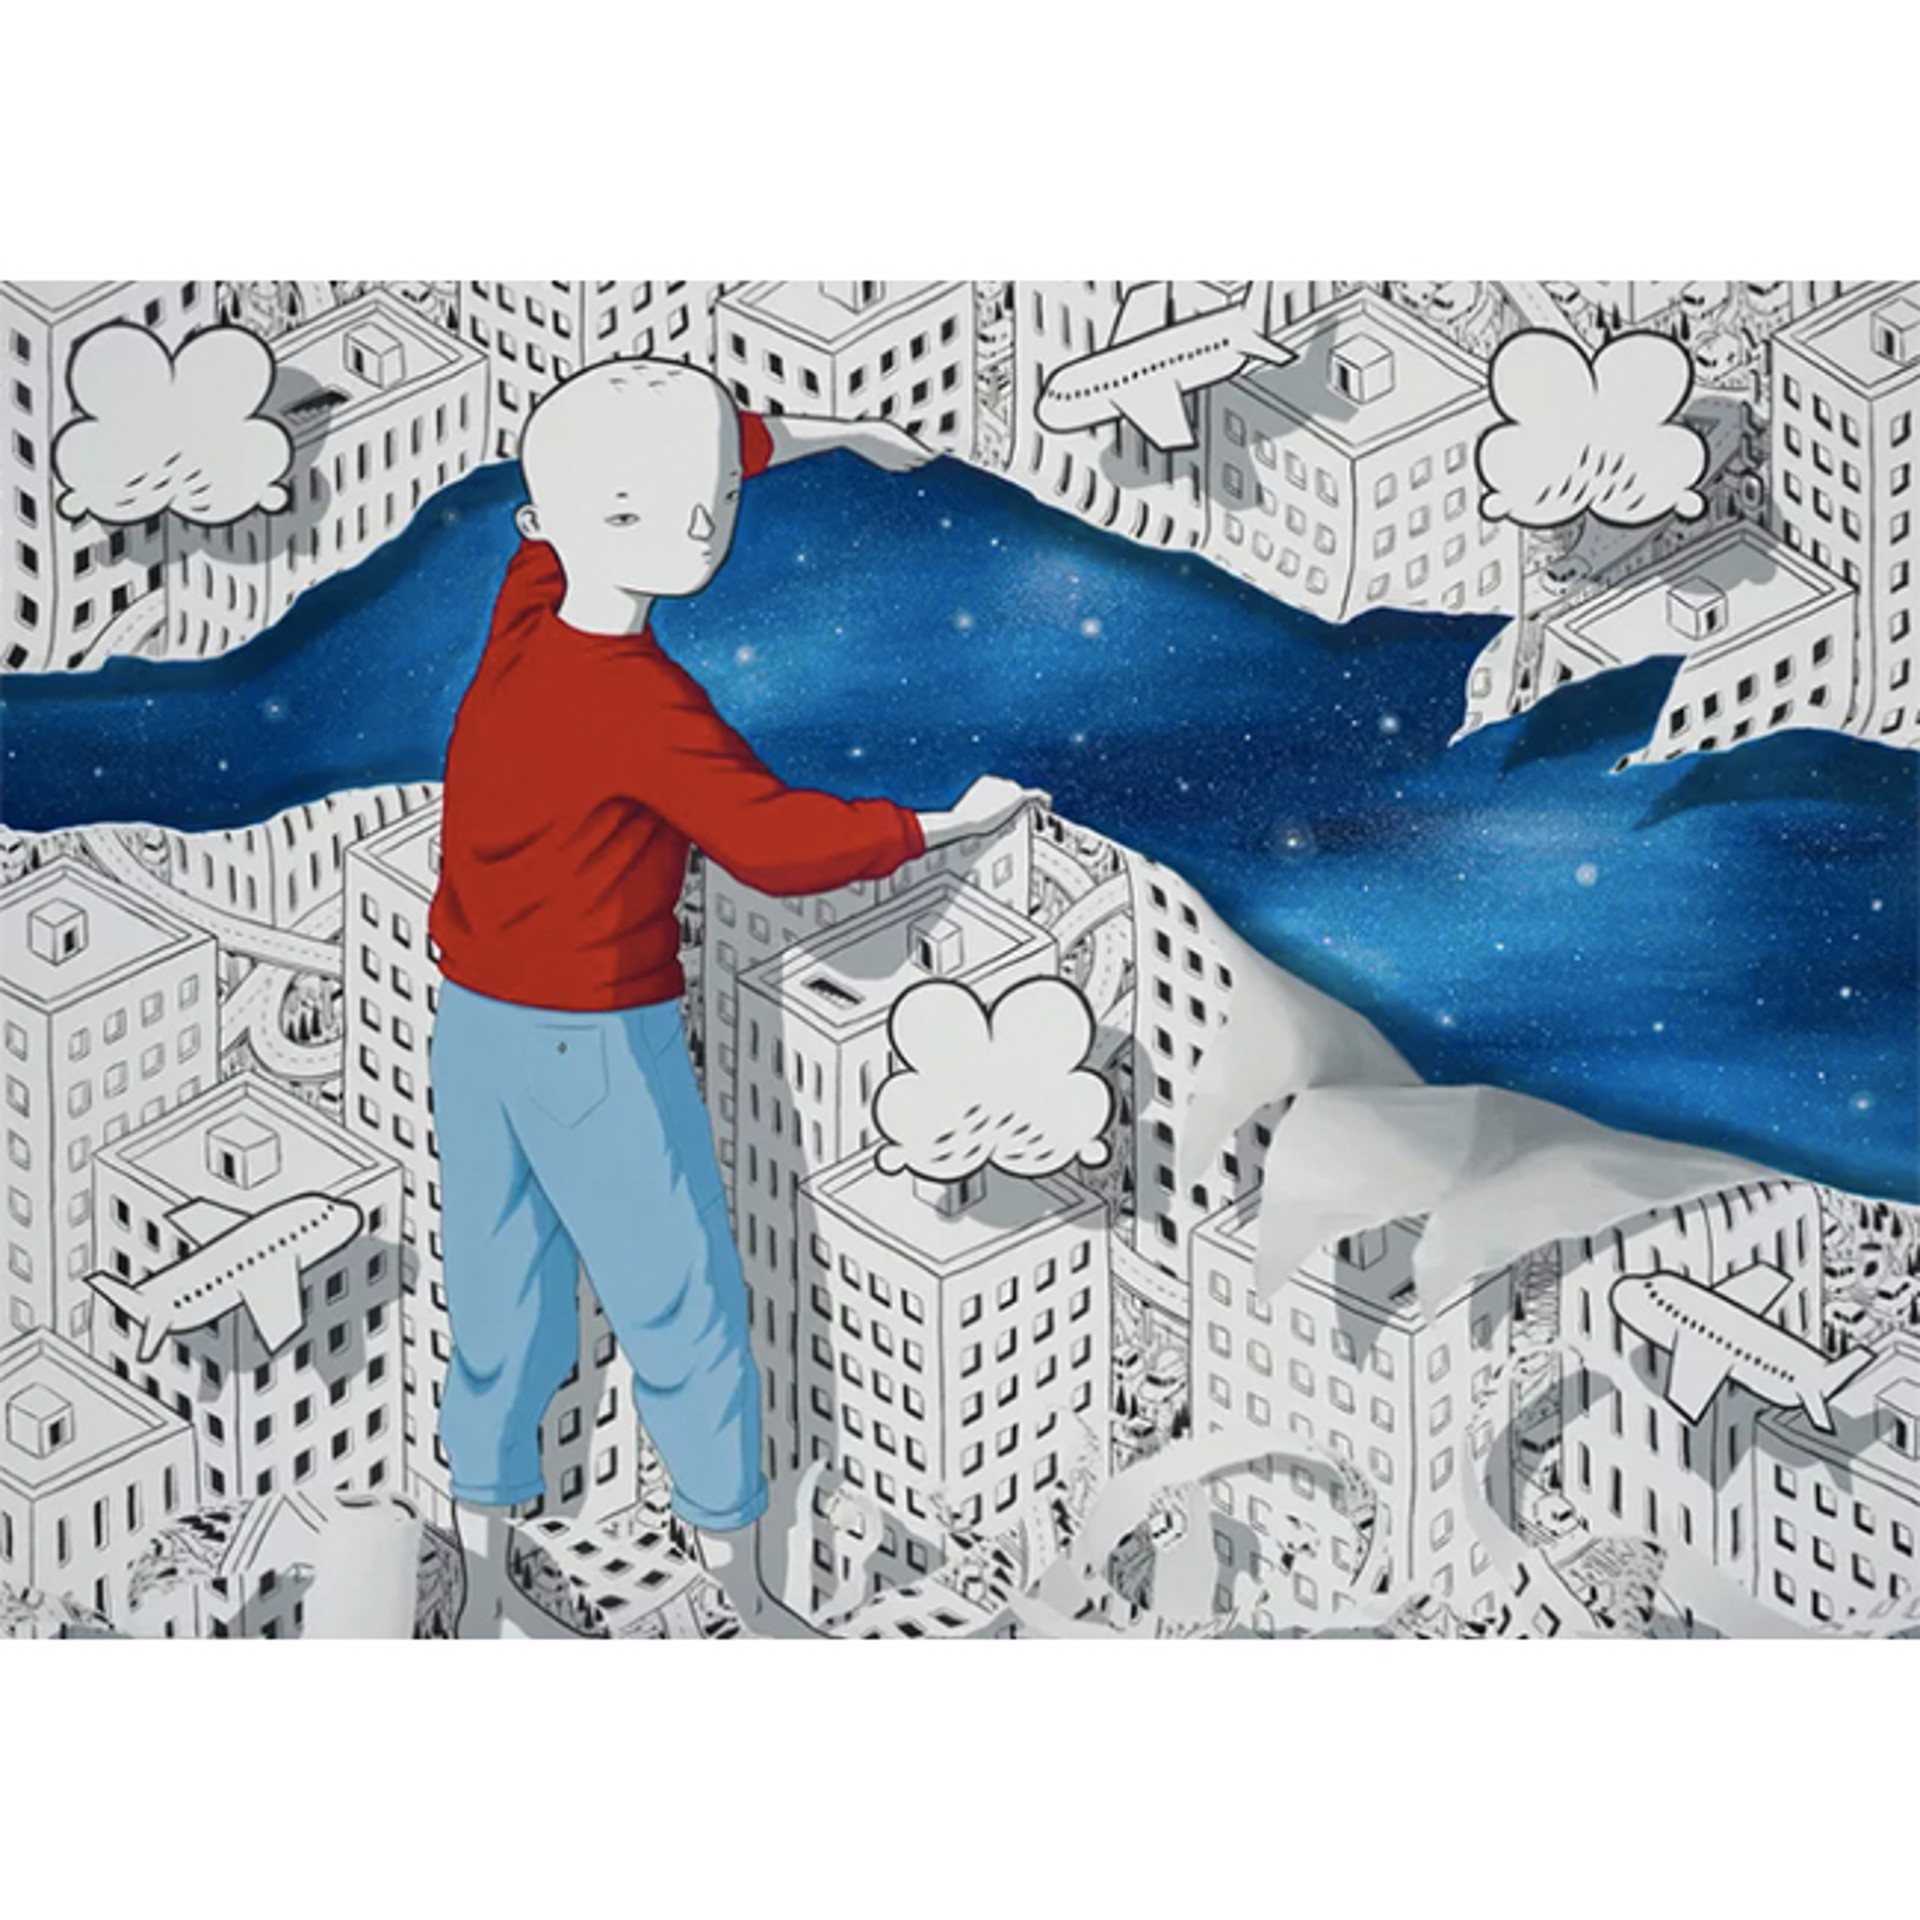 Between the Dark of The Night and Light of The Day by MiLLO